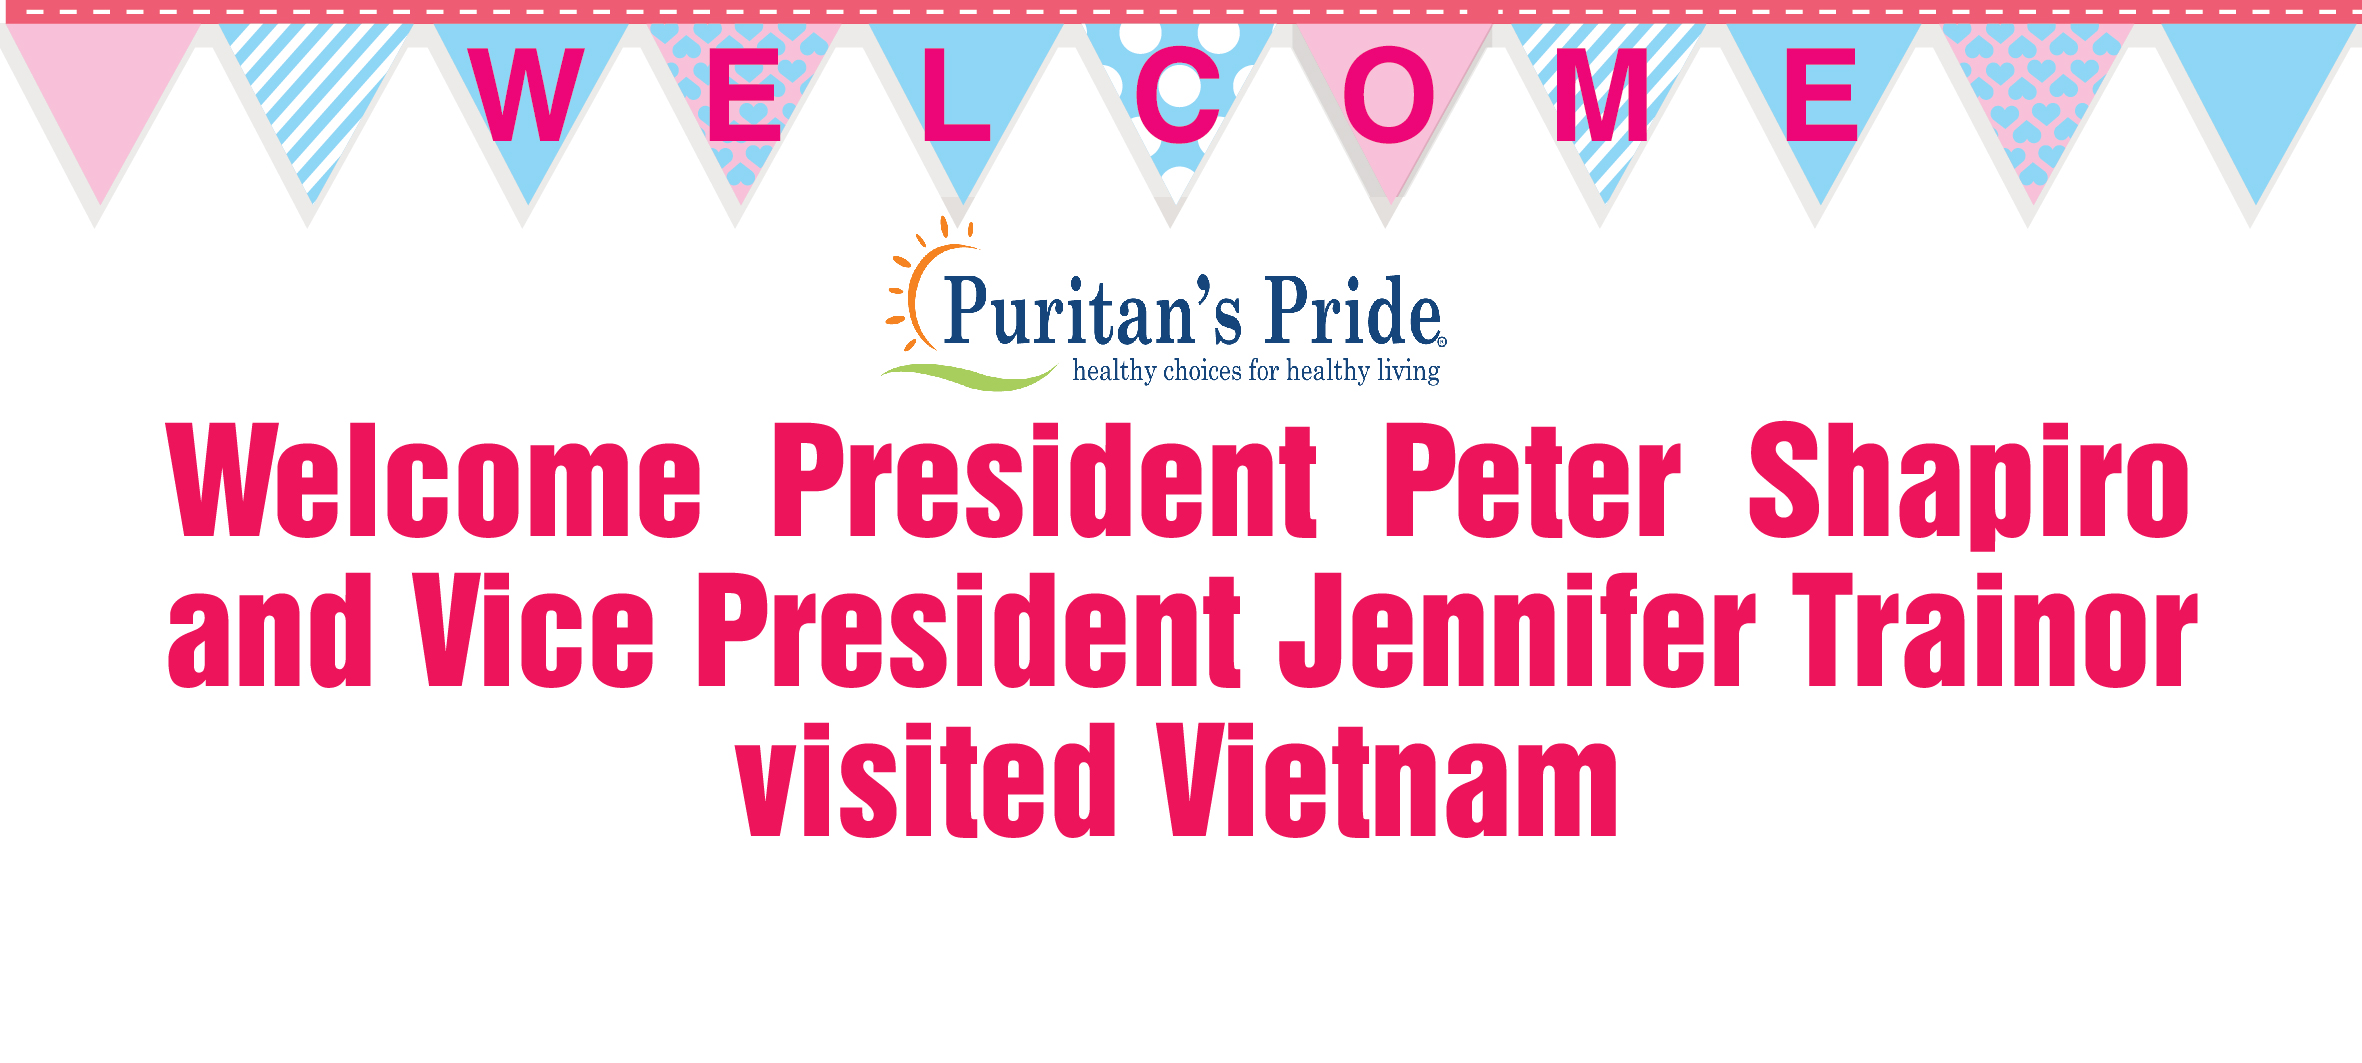 Welcome to represent the company Puritan s Pride visited Vietnam